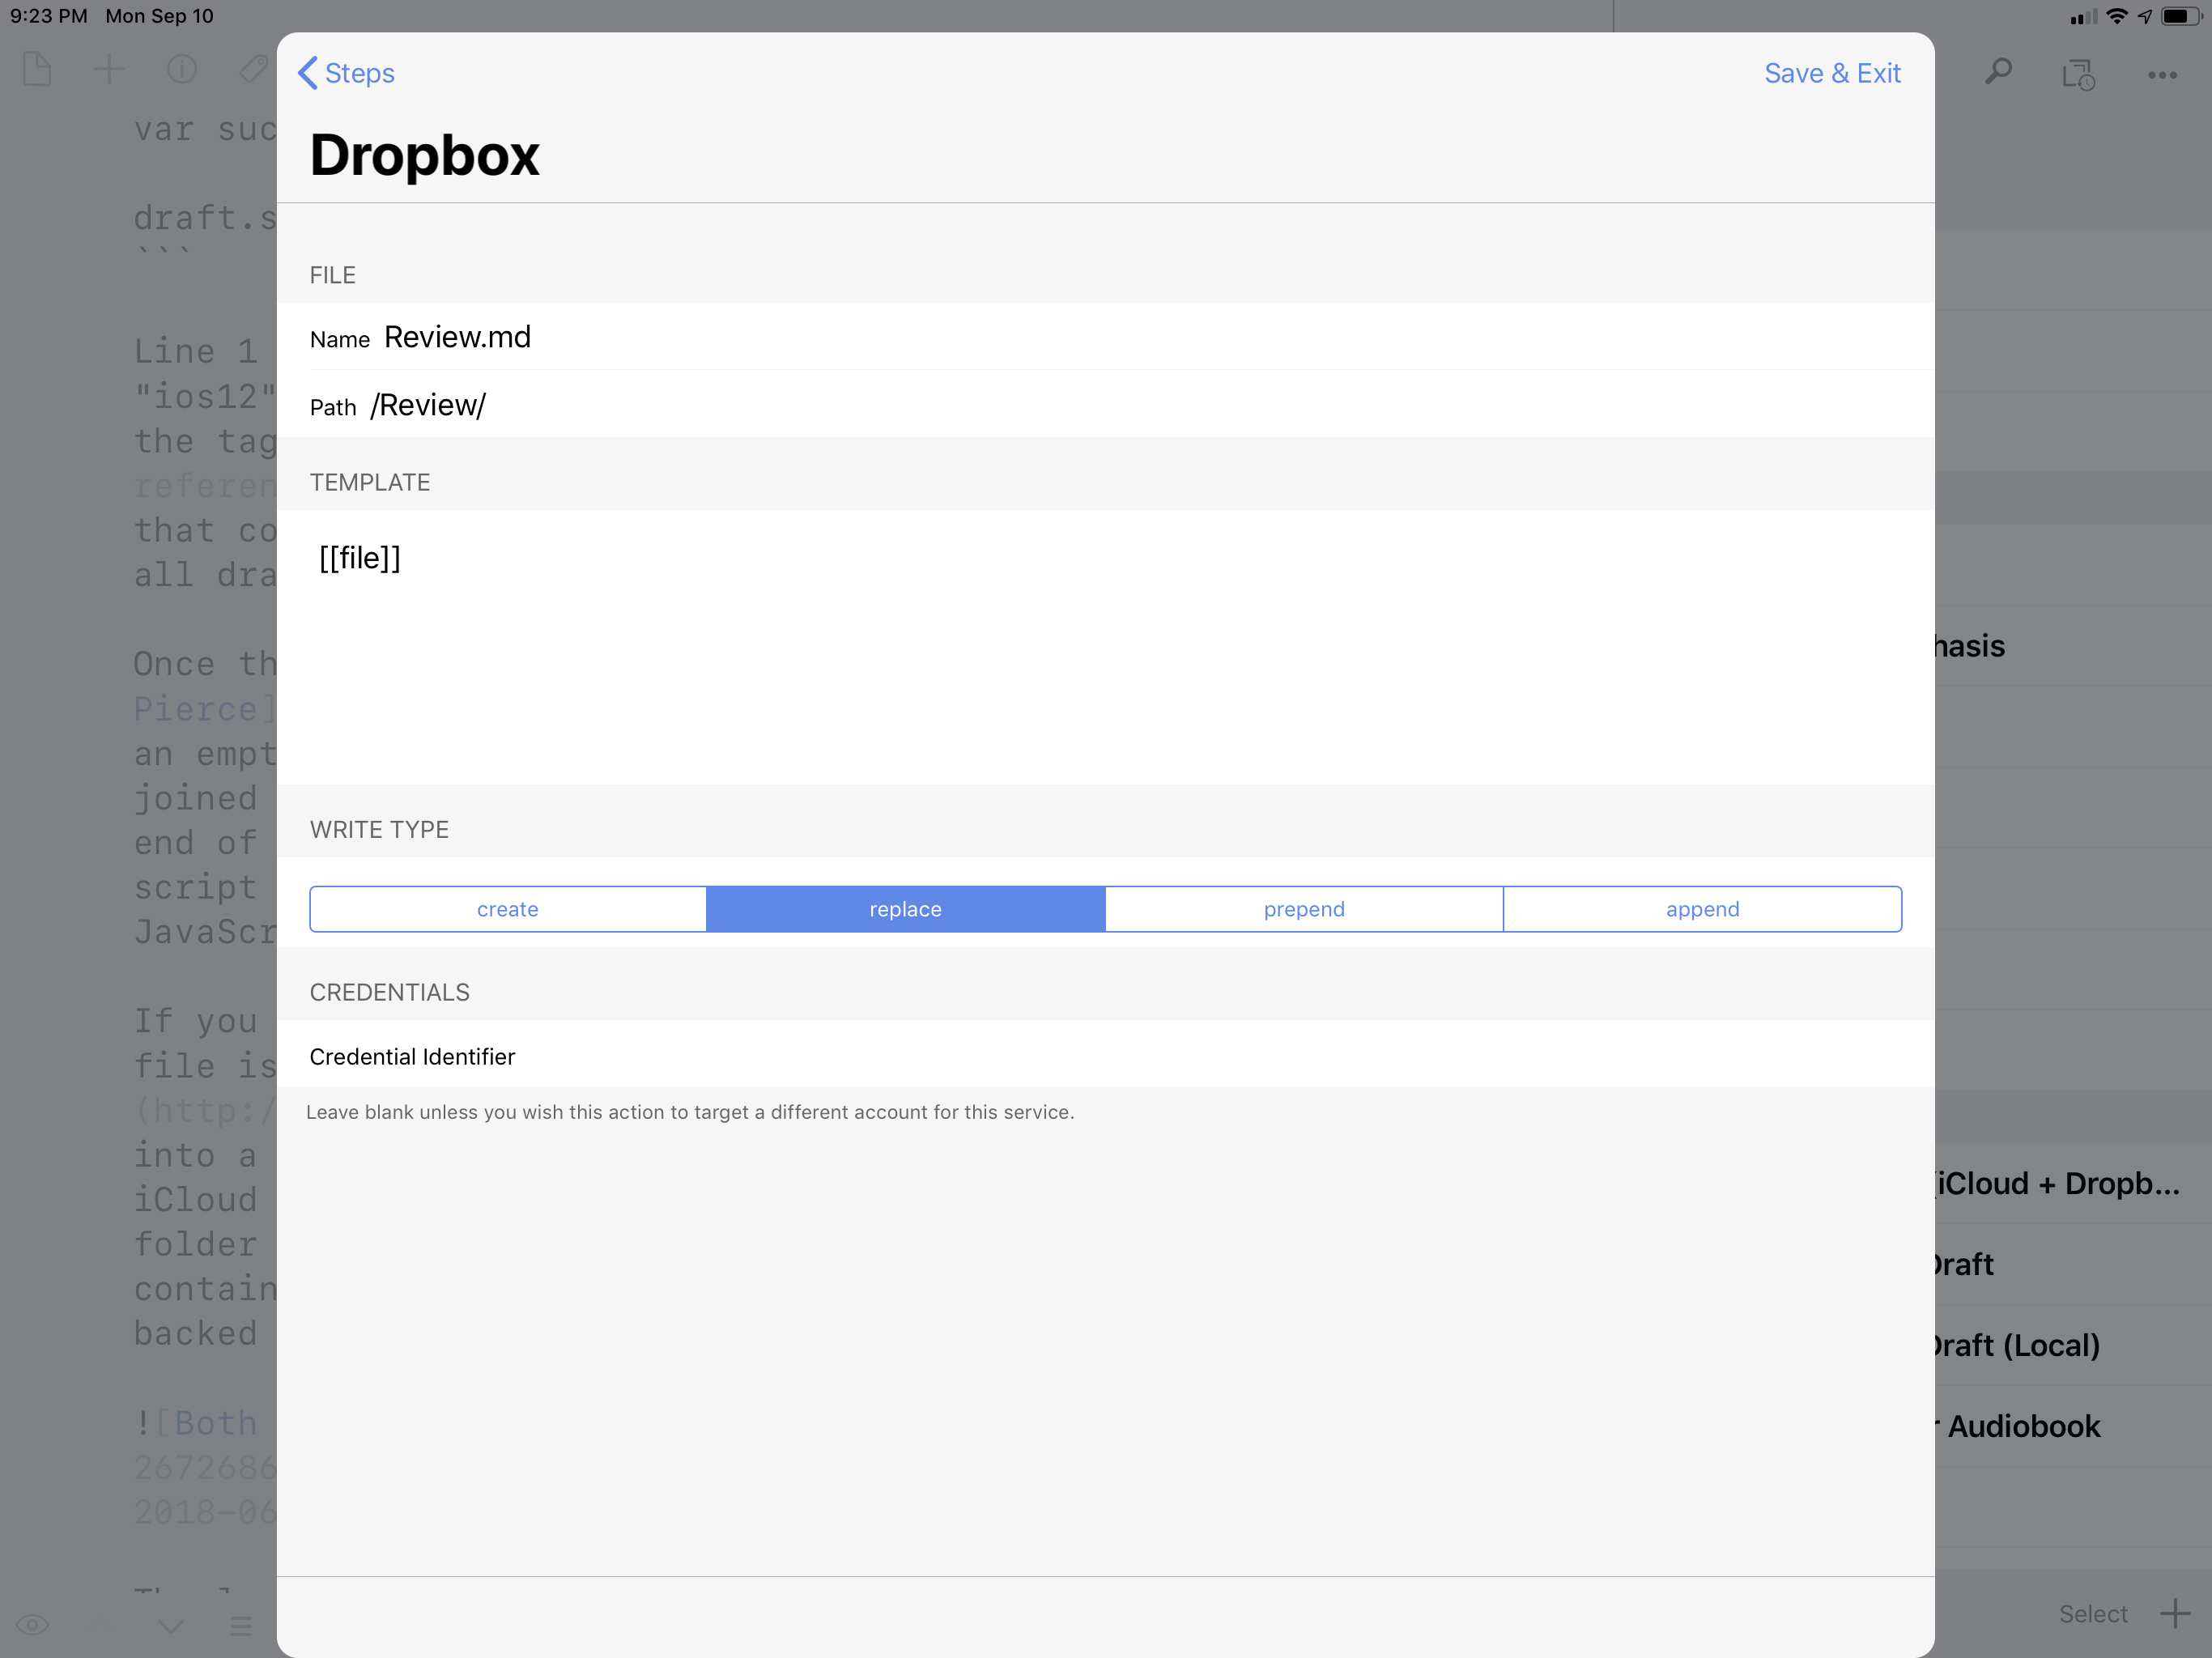 Saving a compiled draft of the review in Dropbox.